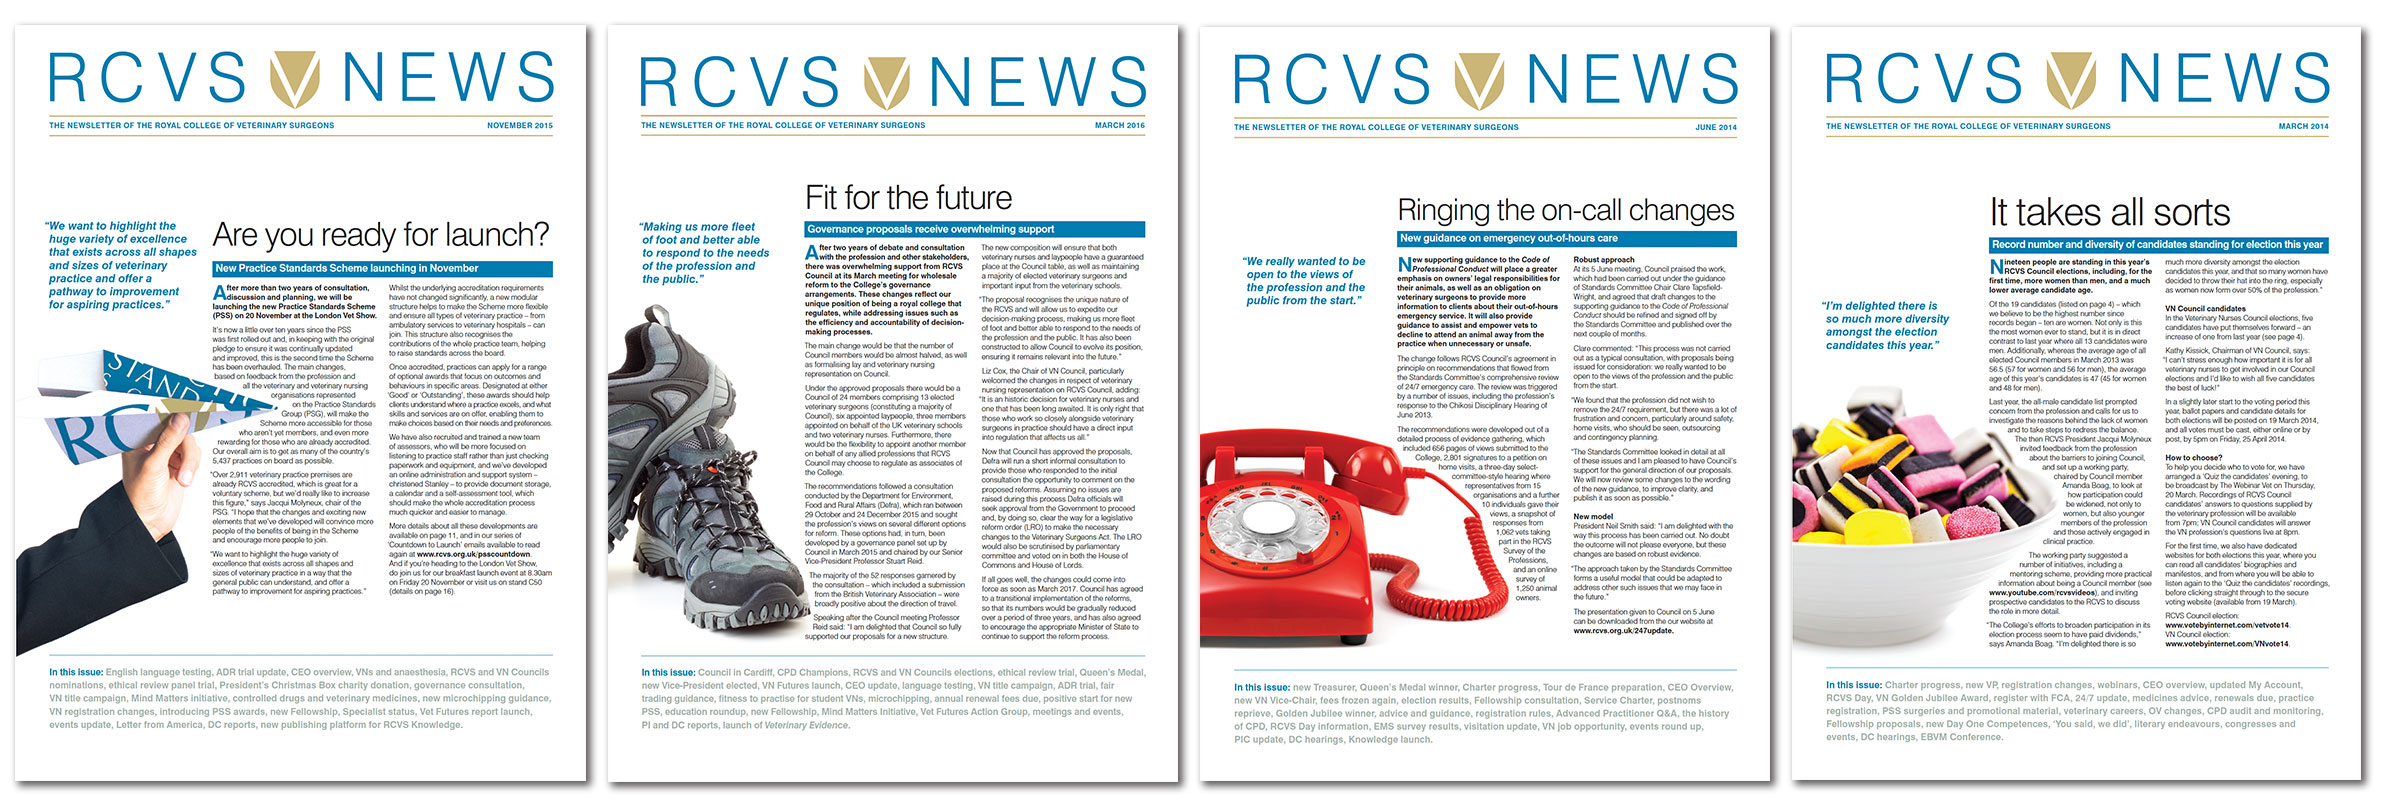 RCVS-covers